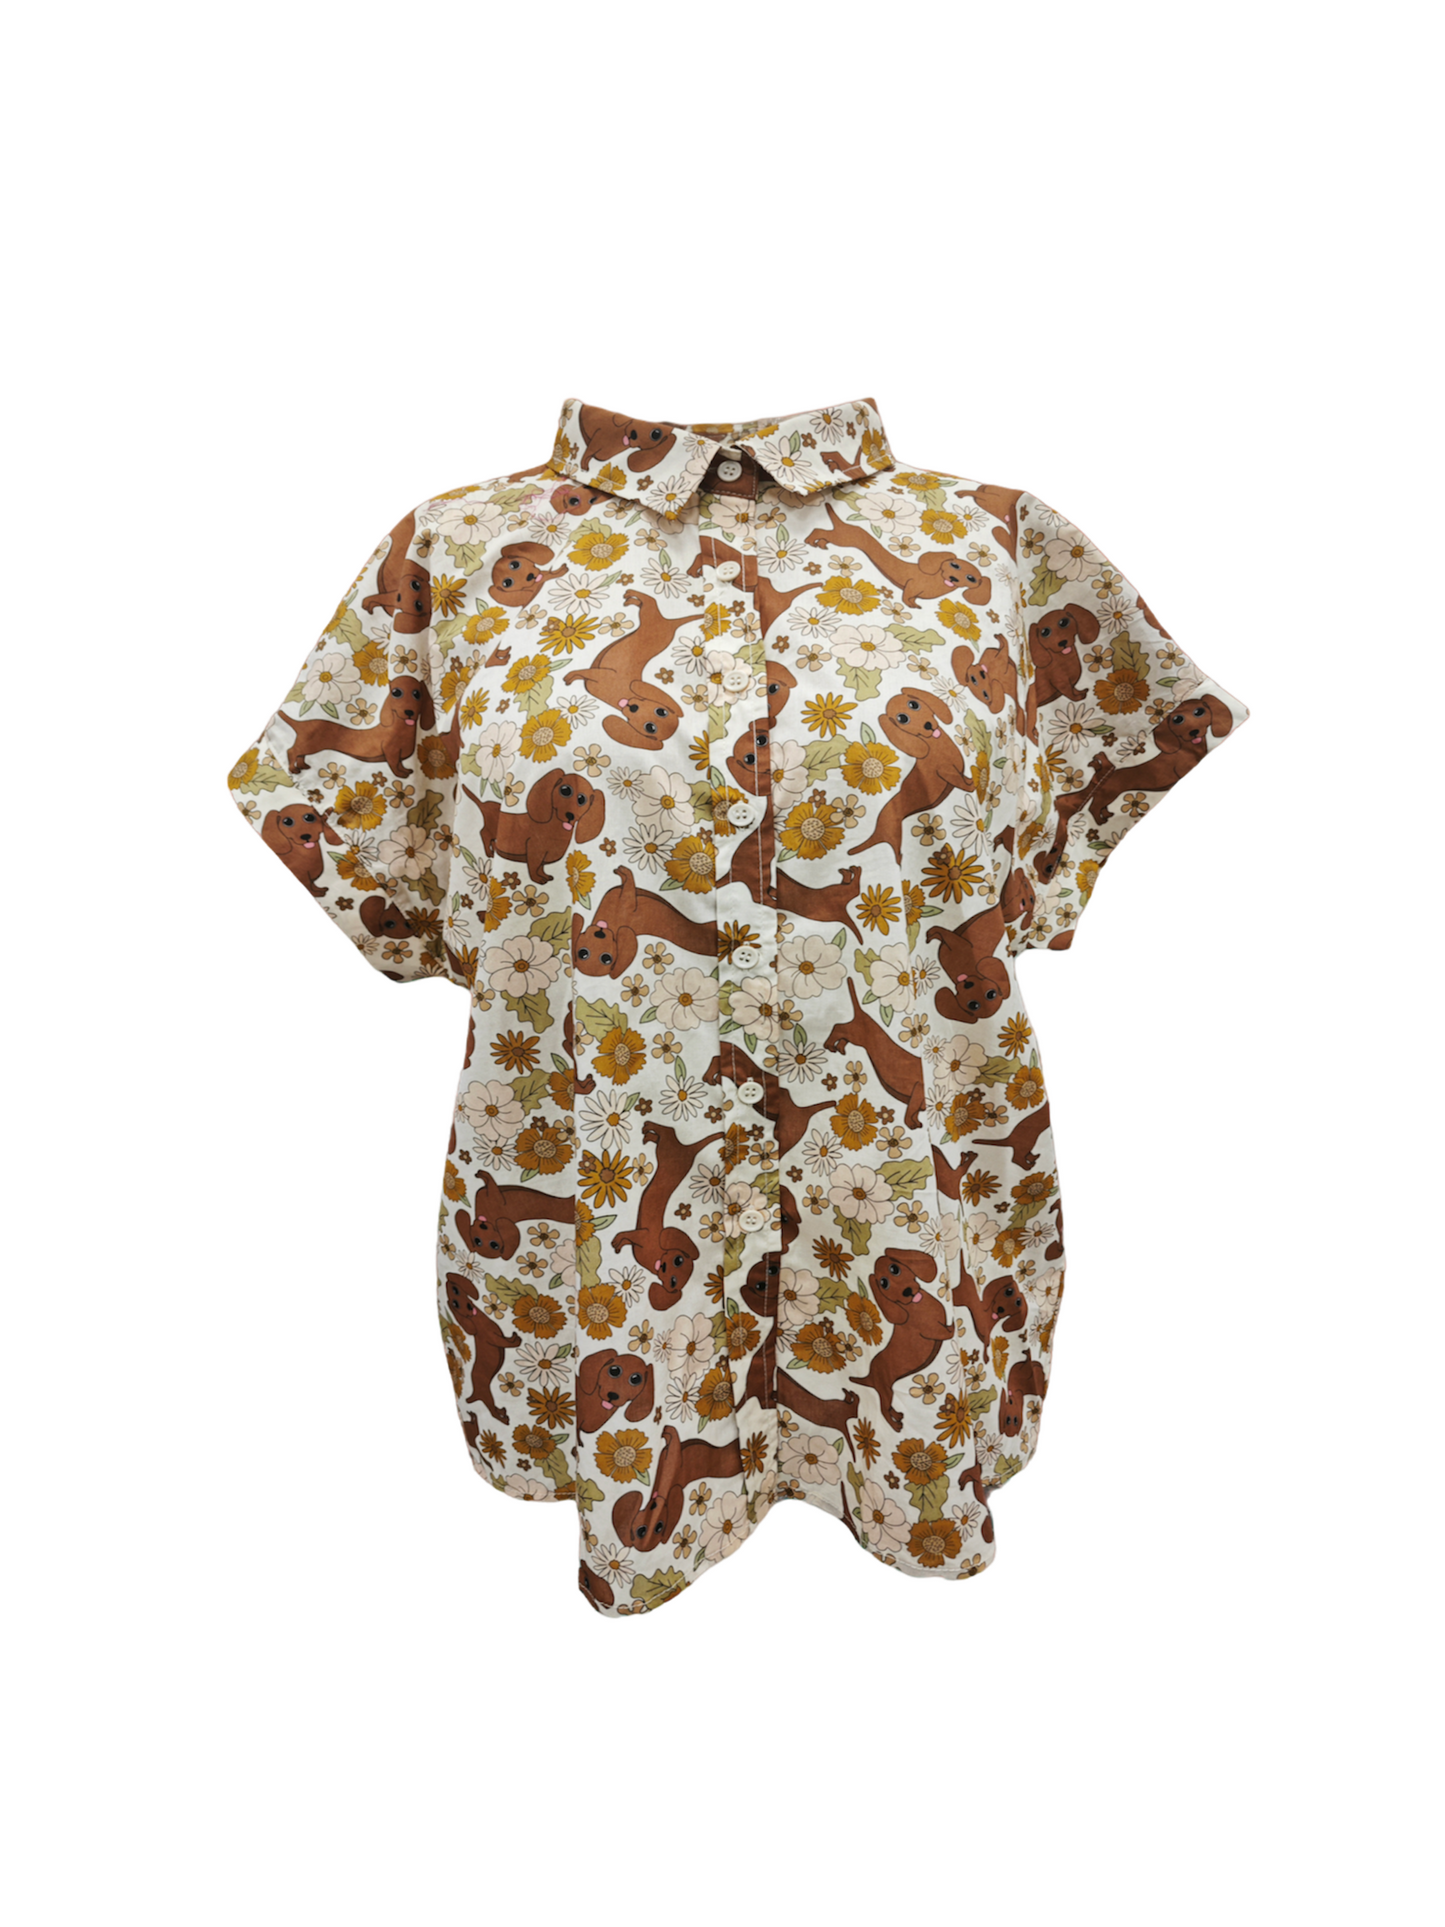 Sausage Dog Top (Size 8,12,14 ONLY)